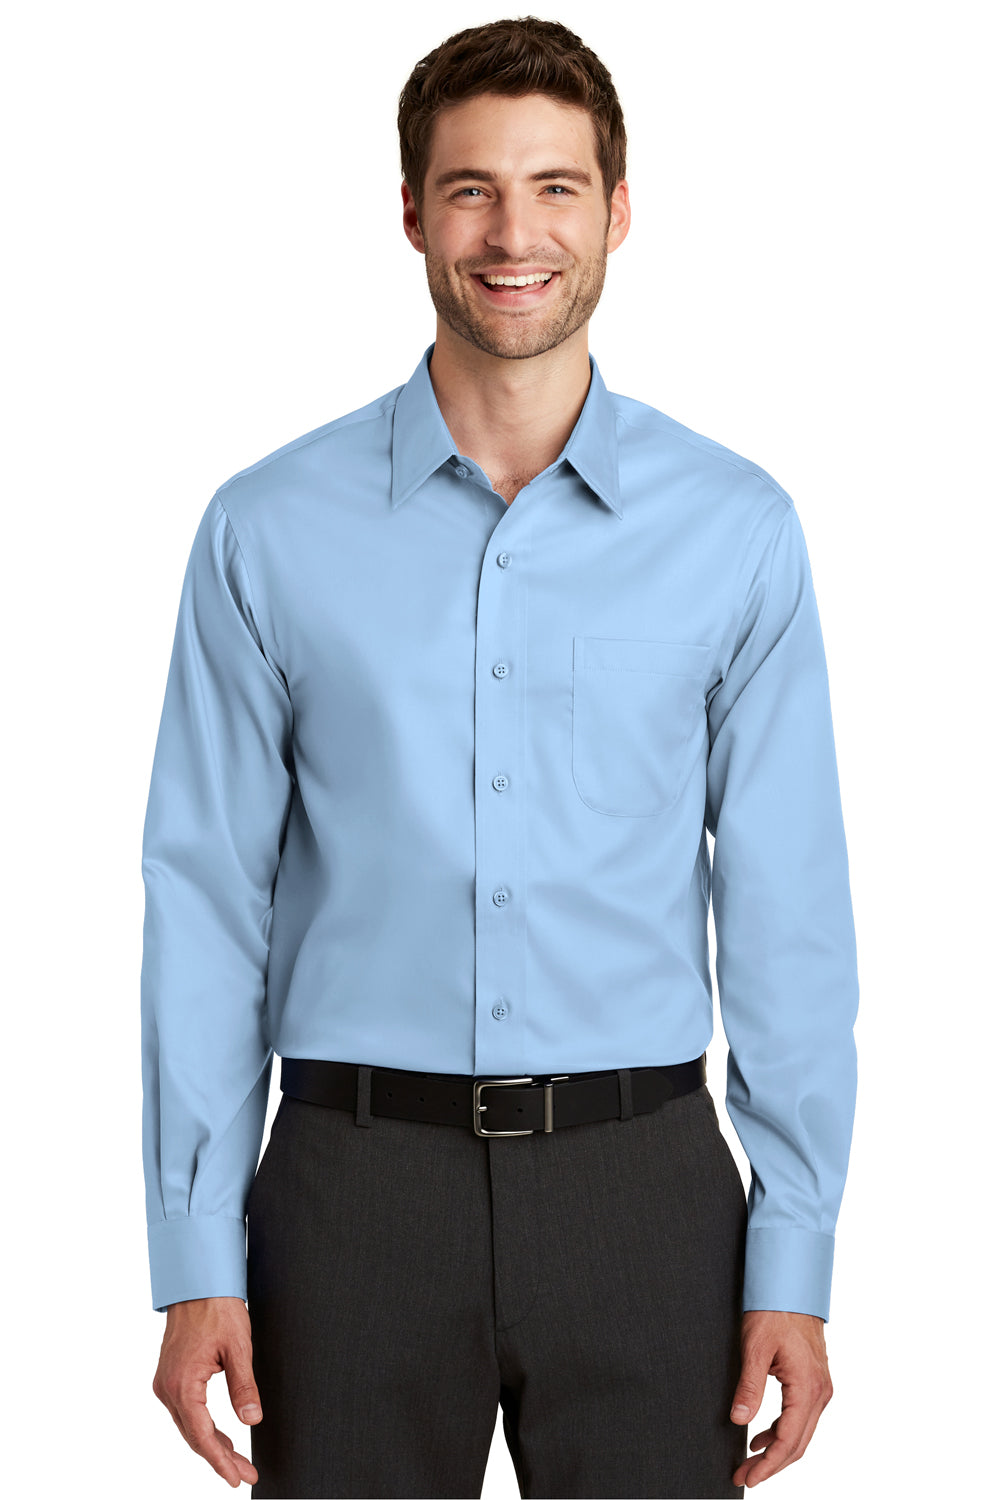 Port Authority S638 Mens Wrinkle Resistant Long Sleeve Button Down Shirt w/ Pocket Sky Blue Front